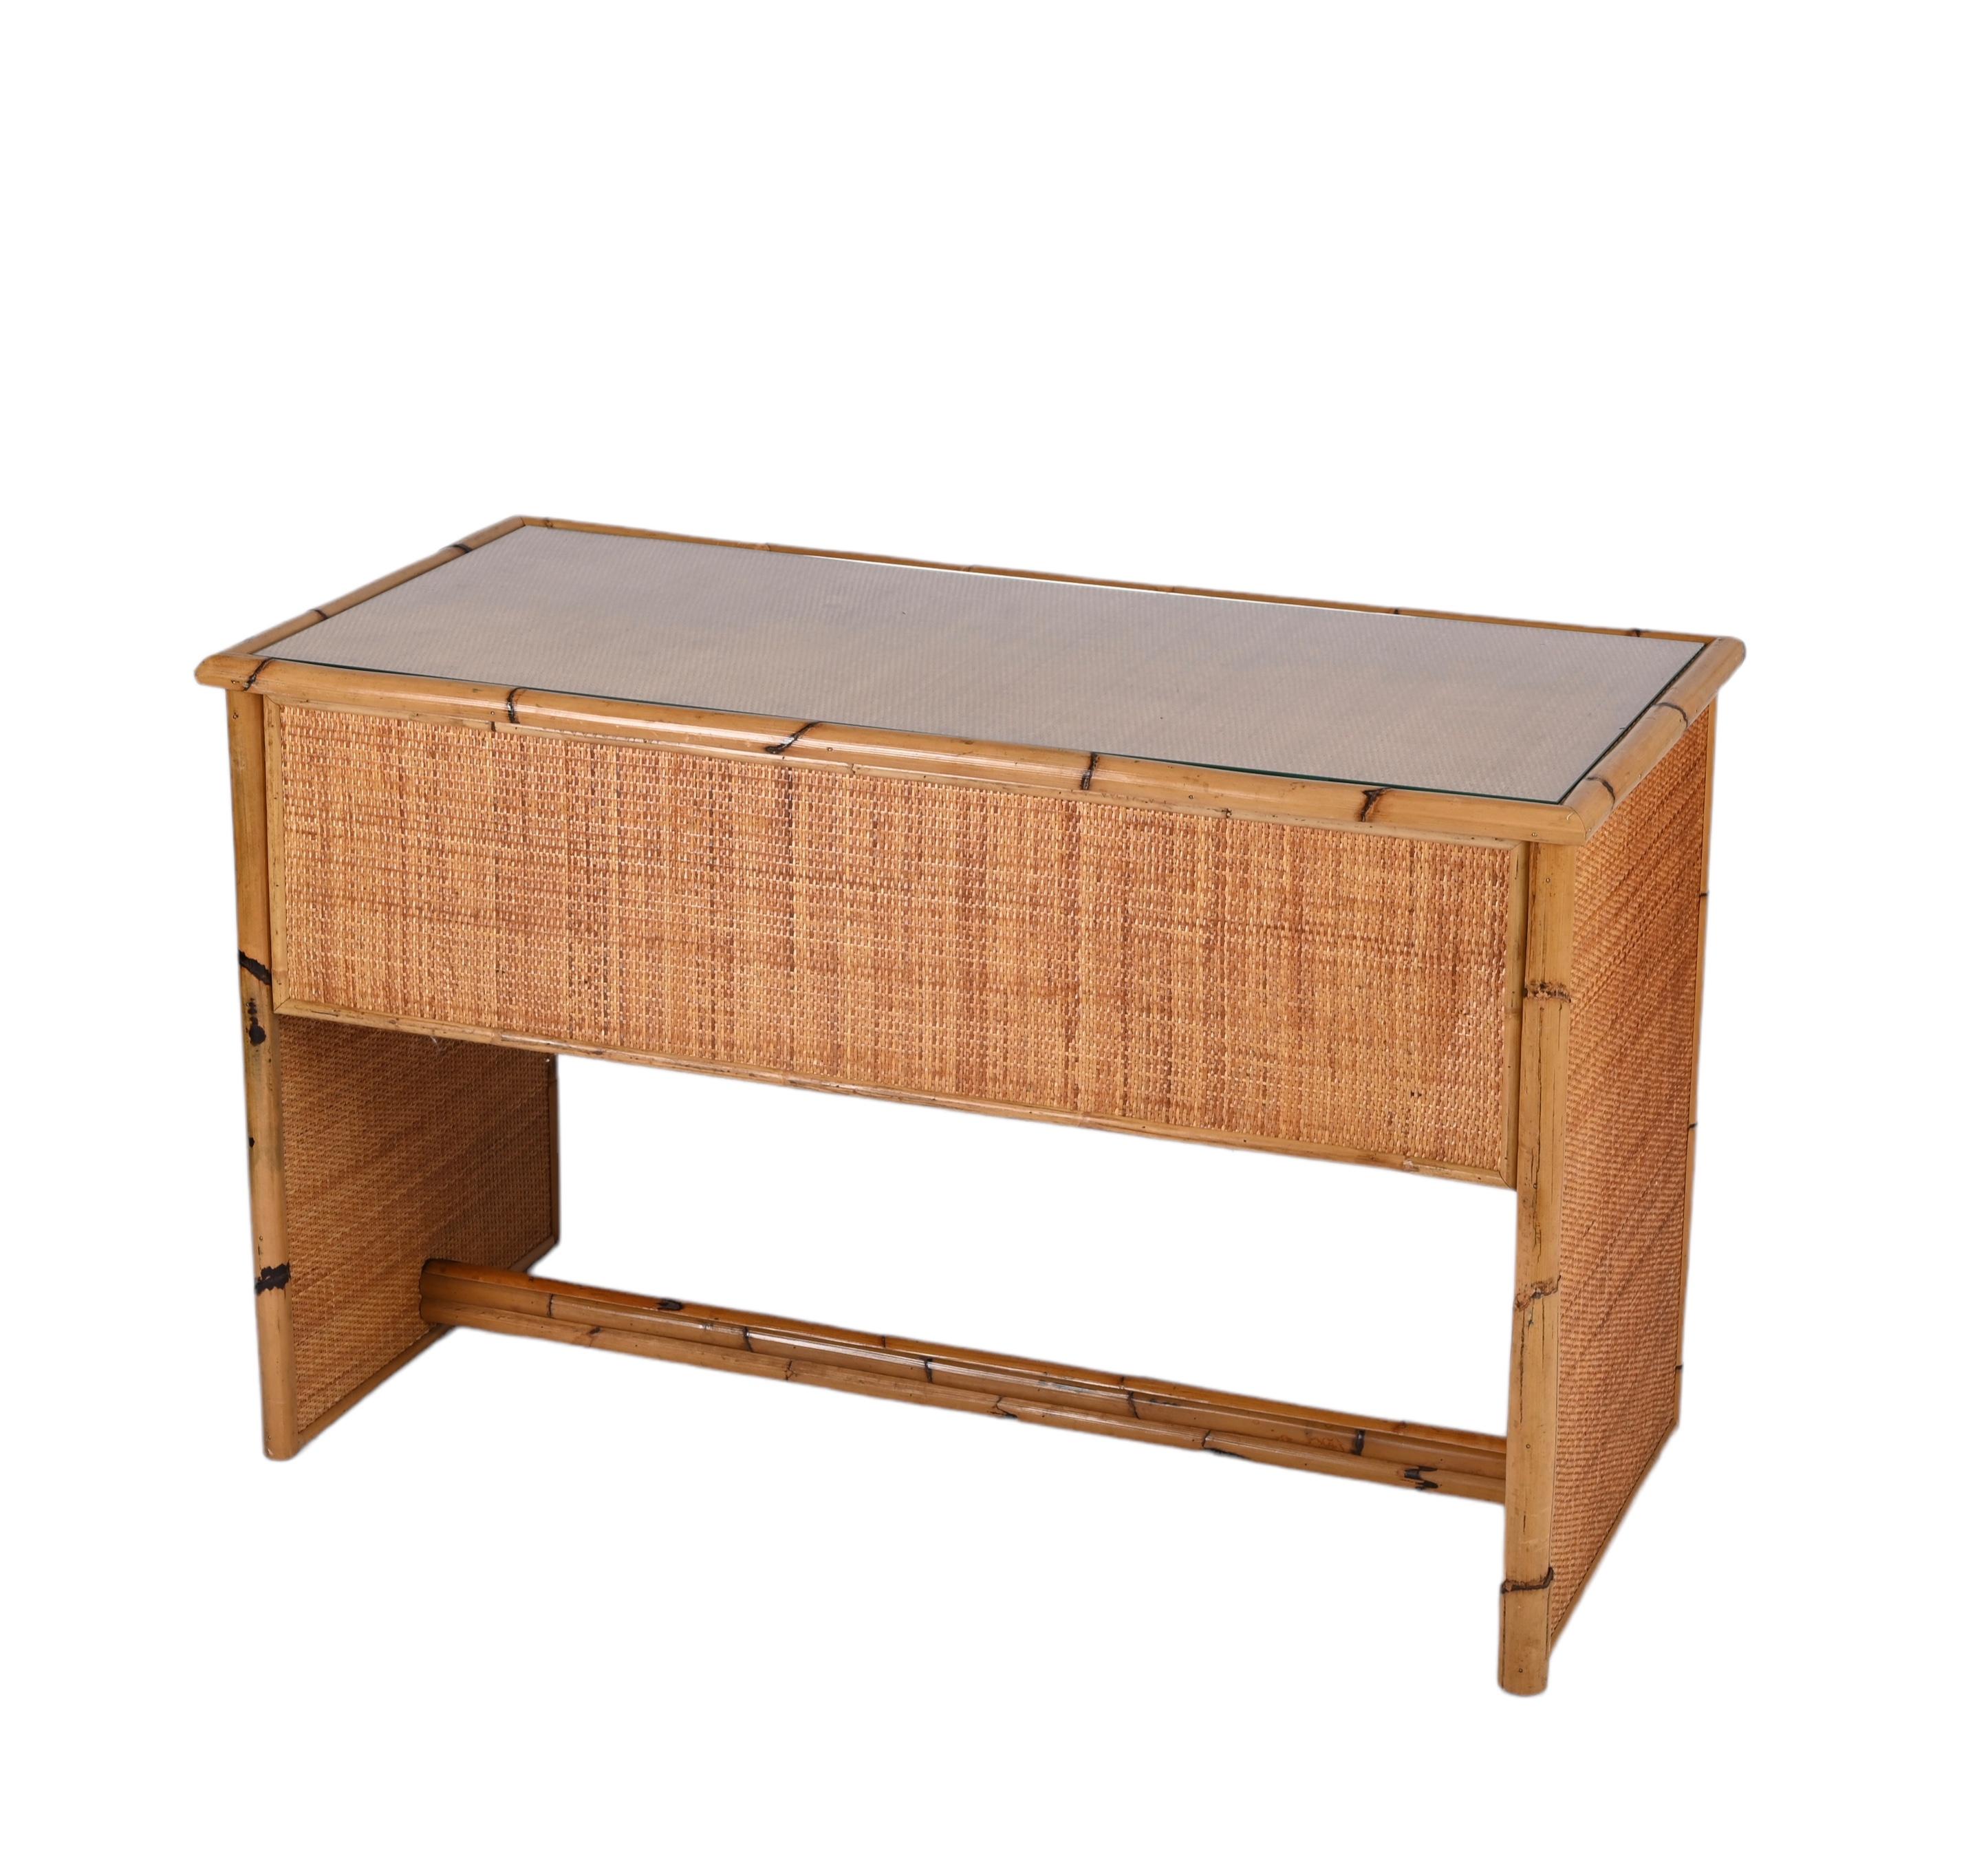 Midcentury Glass Top, Bamboo and Wicker Italian Desk with Drawers, 1980s For Sale 9